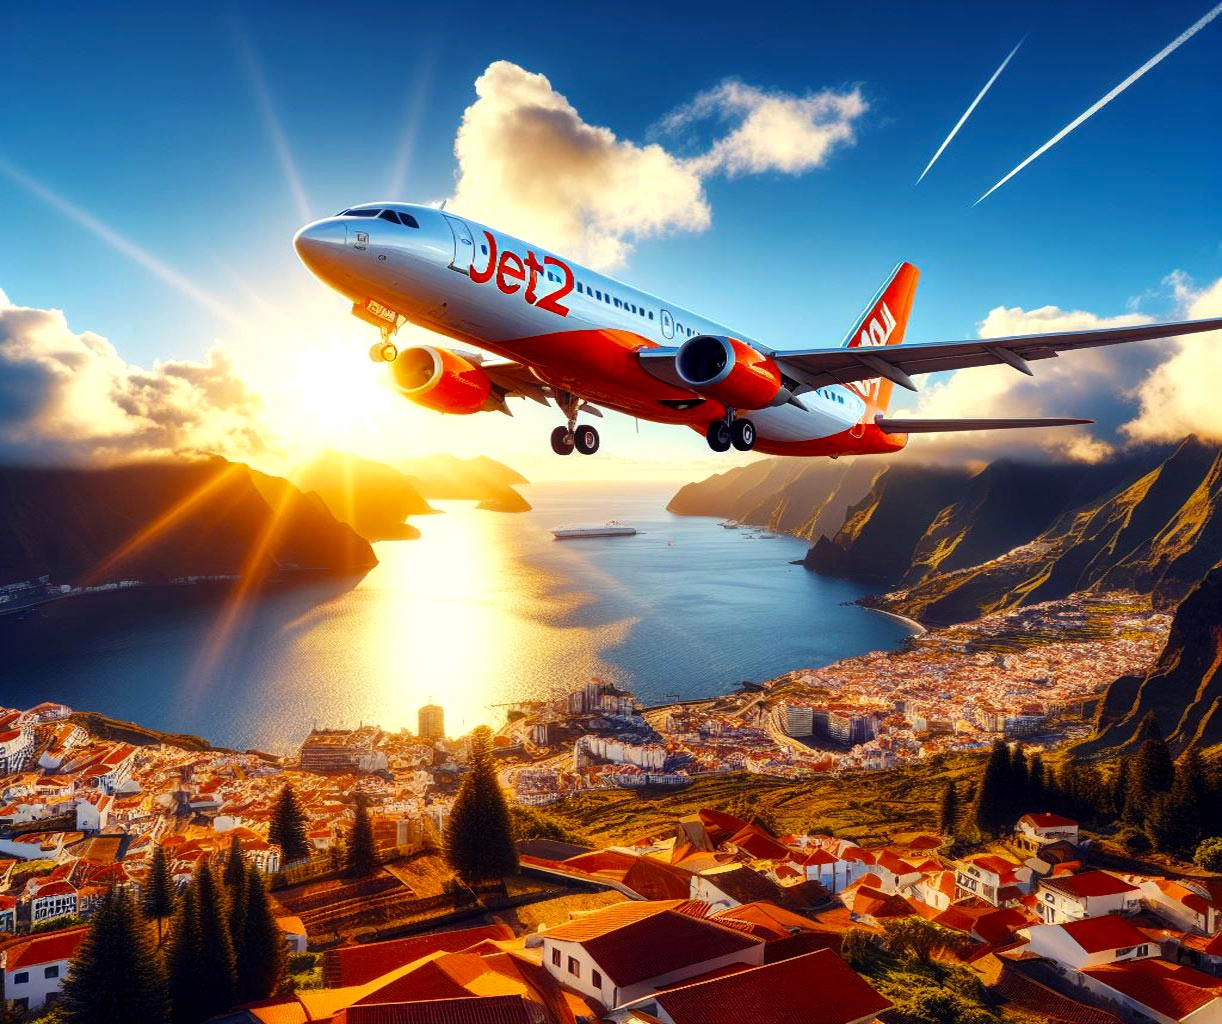 Jet2 Opens New Direct Flights To Madeira From The UK